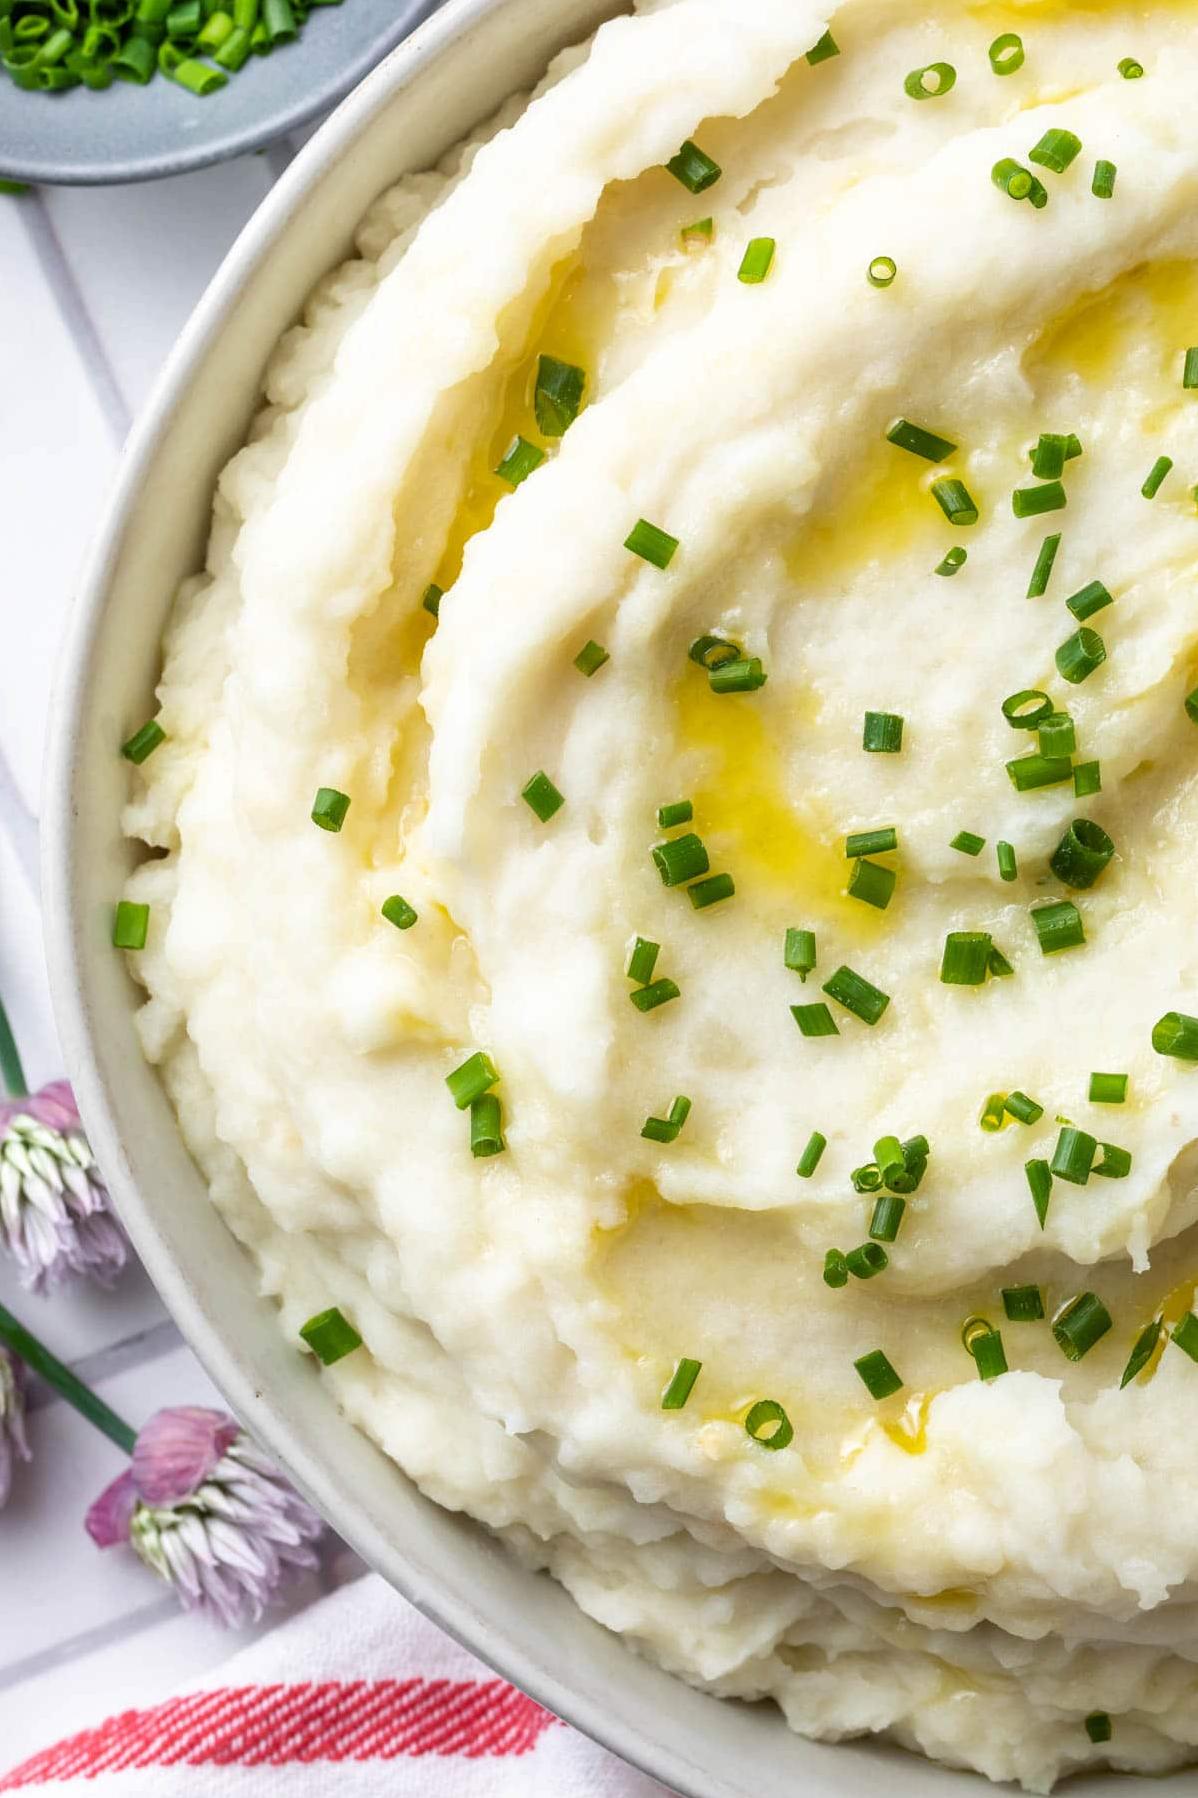  Satisfyingly smooth and fluffy mashed potatoes